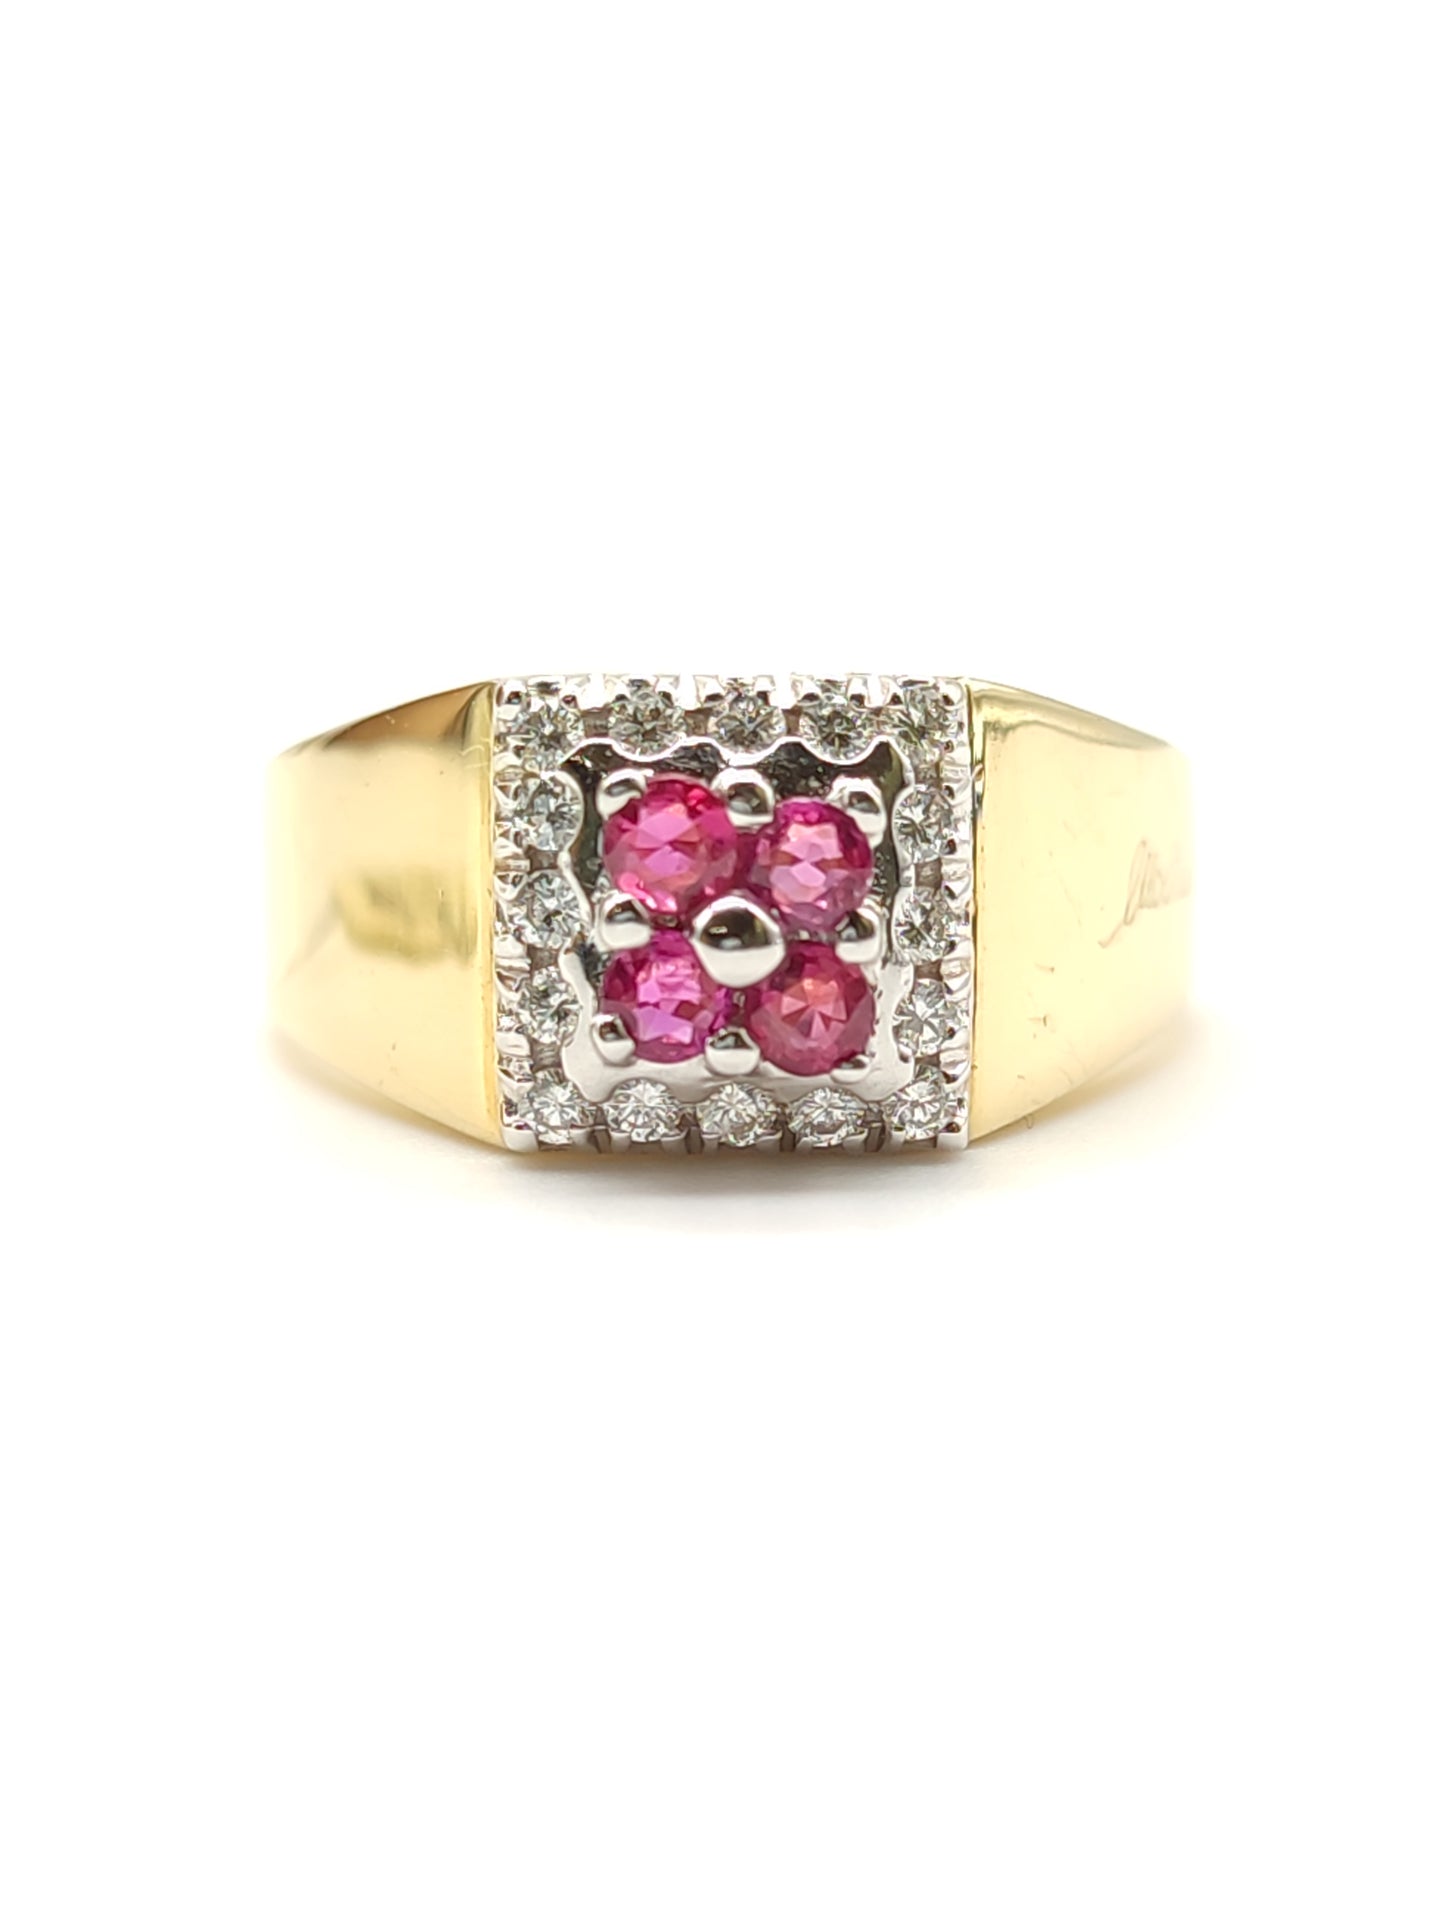 Pavan - Gold band ring with rubies